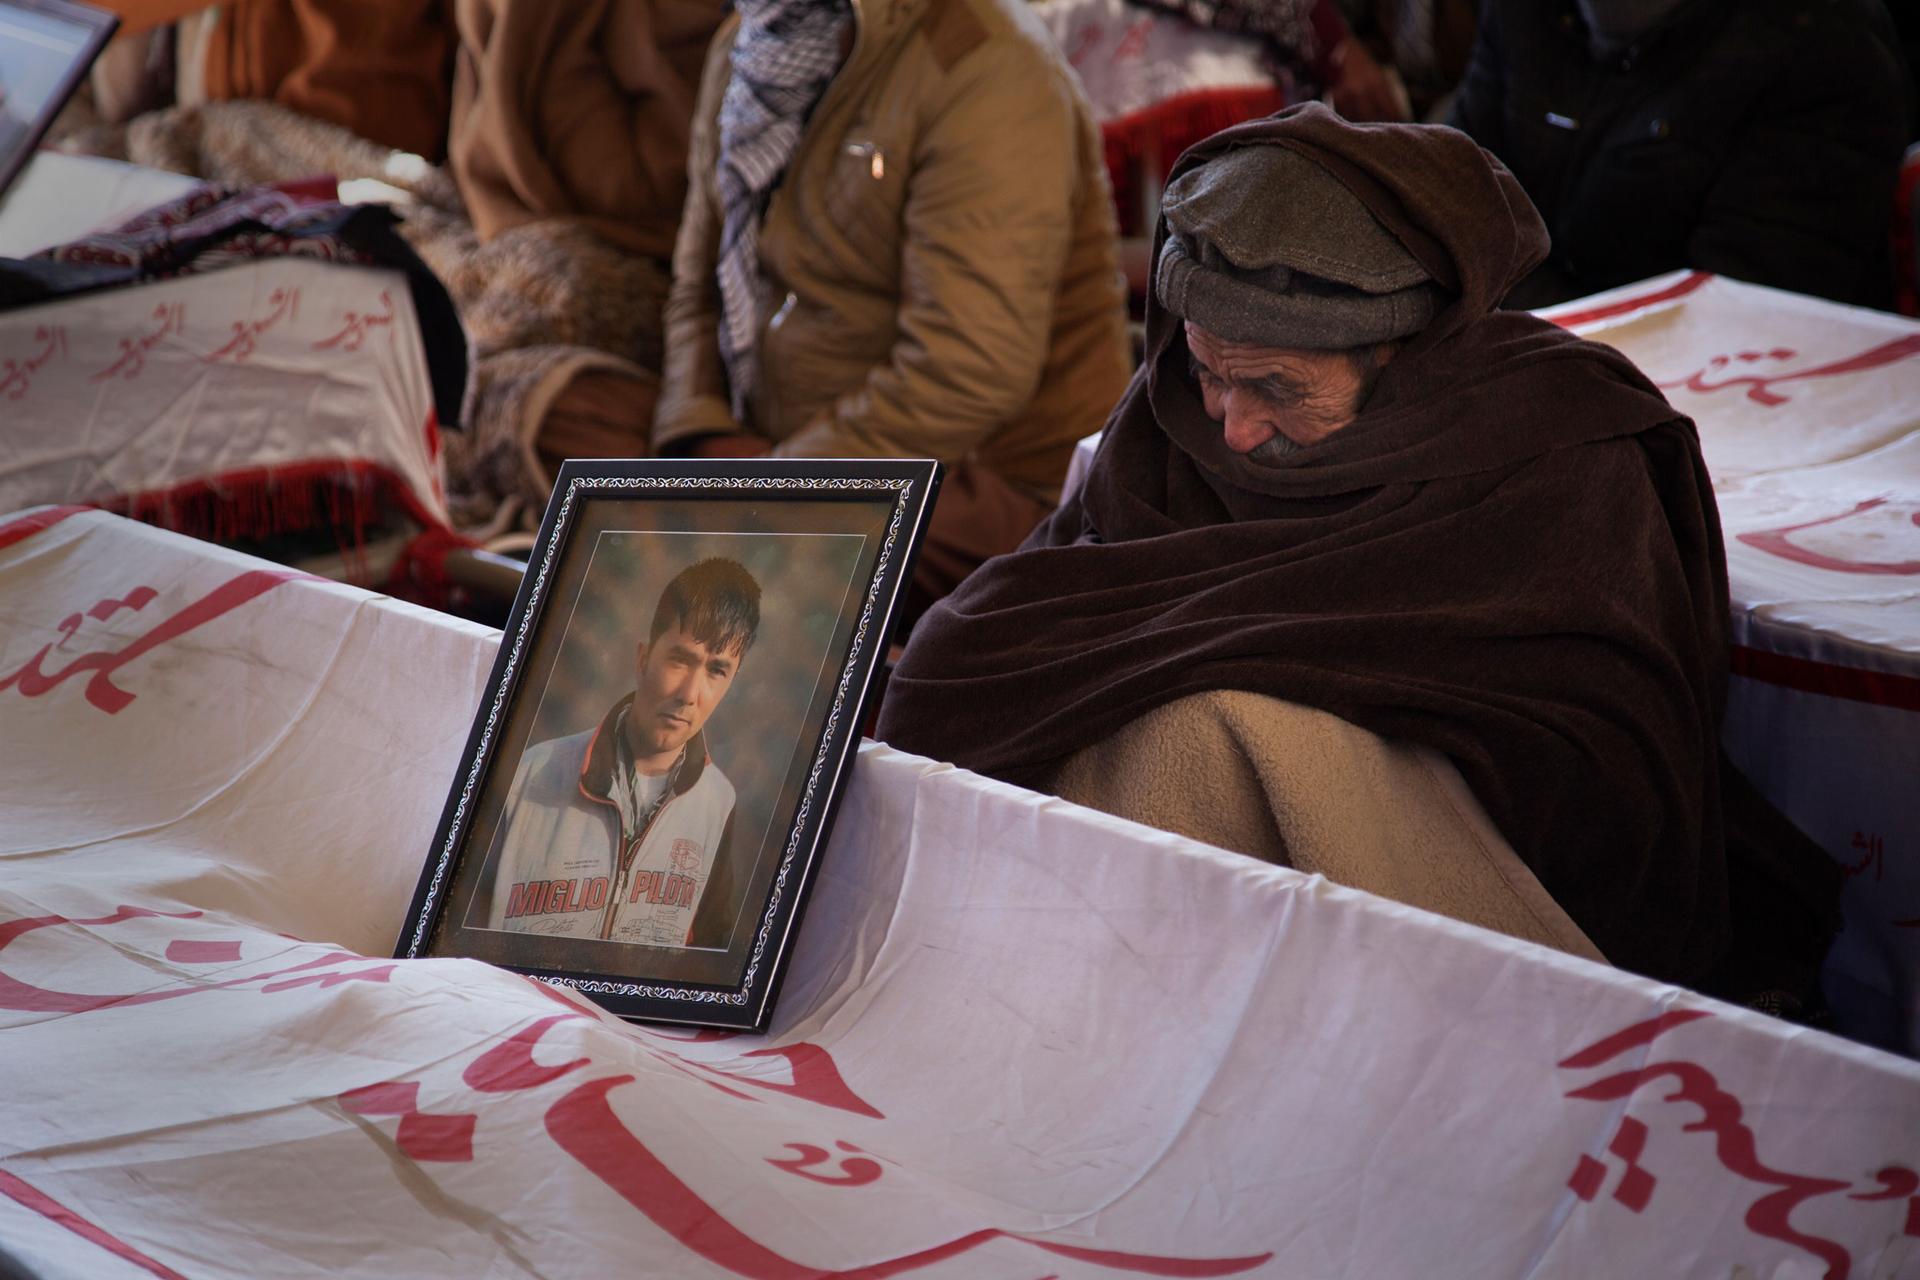 Families of the slain Hazaras staged a sit-in in protest to repeated attacks on their community in Pakistan.